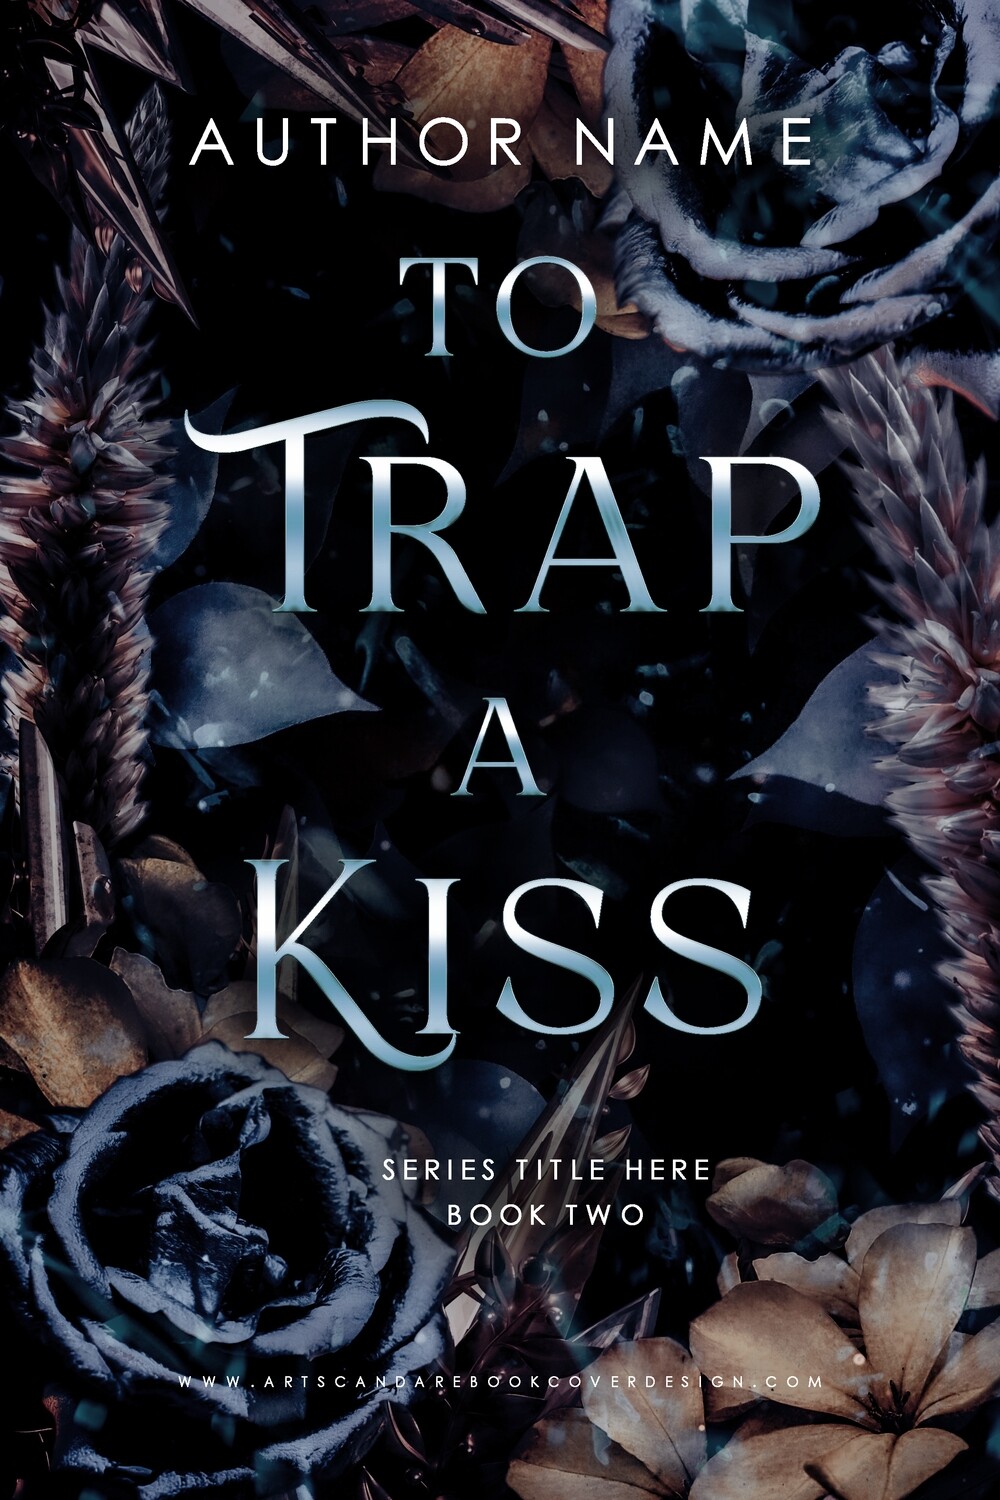 Ebook: To Trap A Kiss DUOLOGY